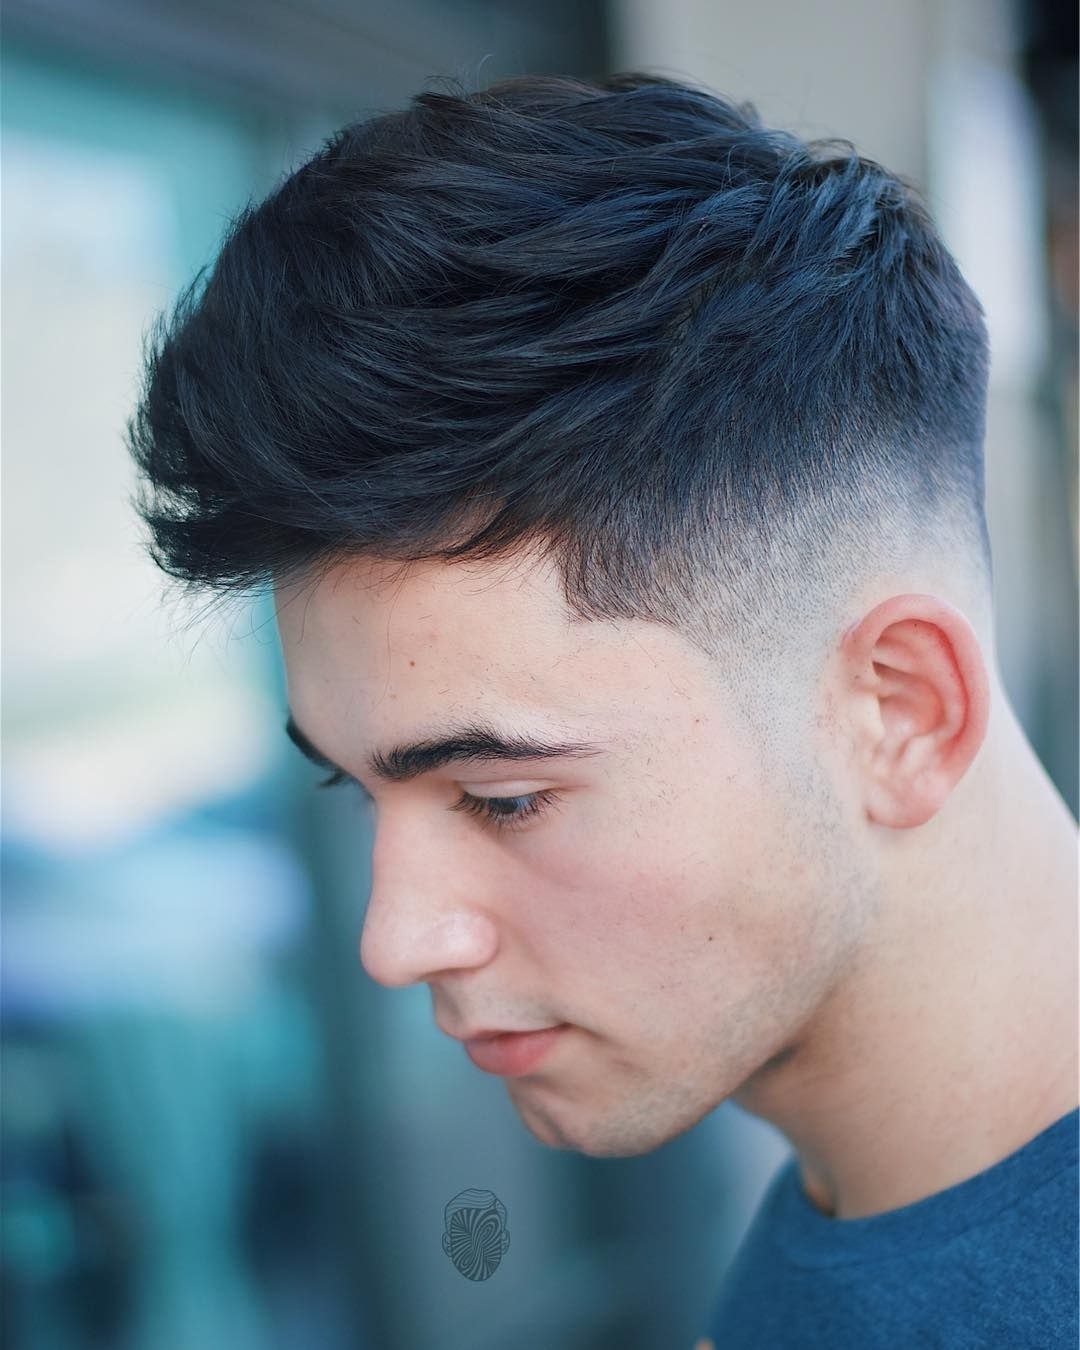 50+ Best Hairstyles For Teenage Boys - The Ultimate Guide 2019 intended for Good Hairstyles For Asian Teenage Guys